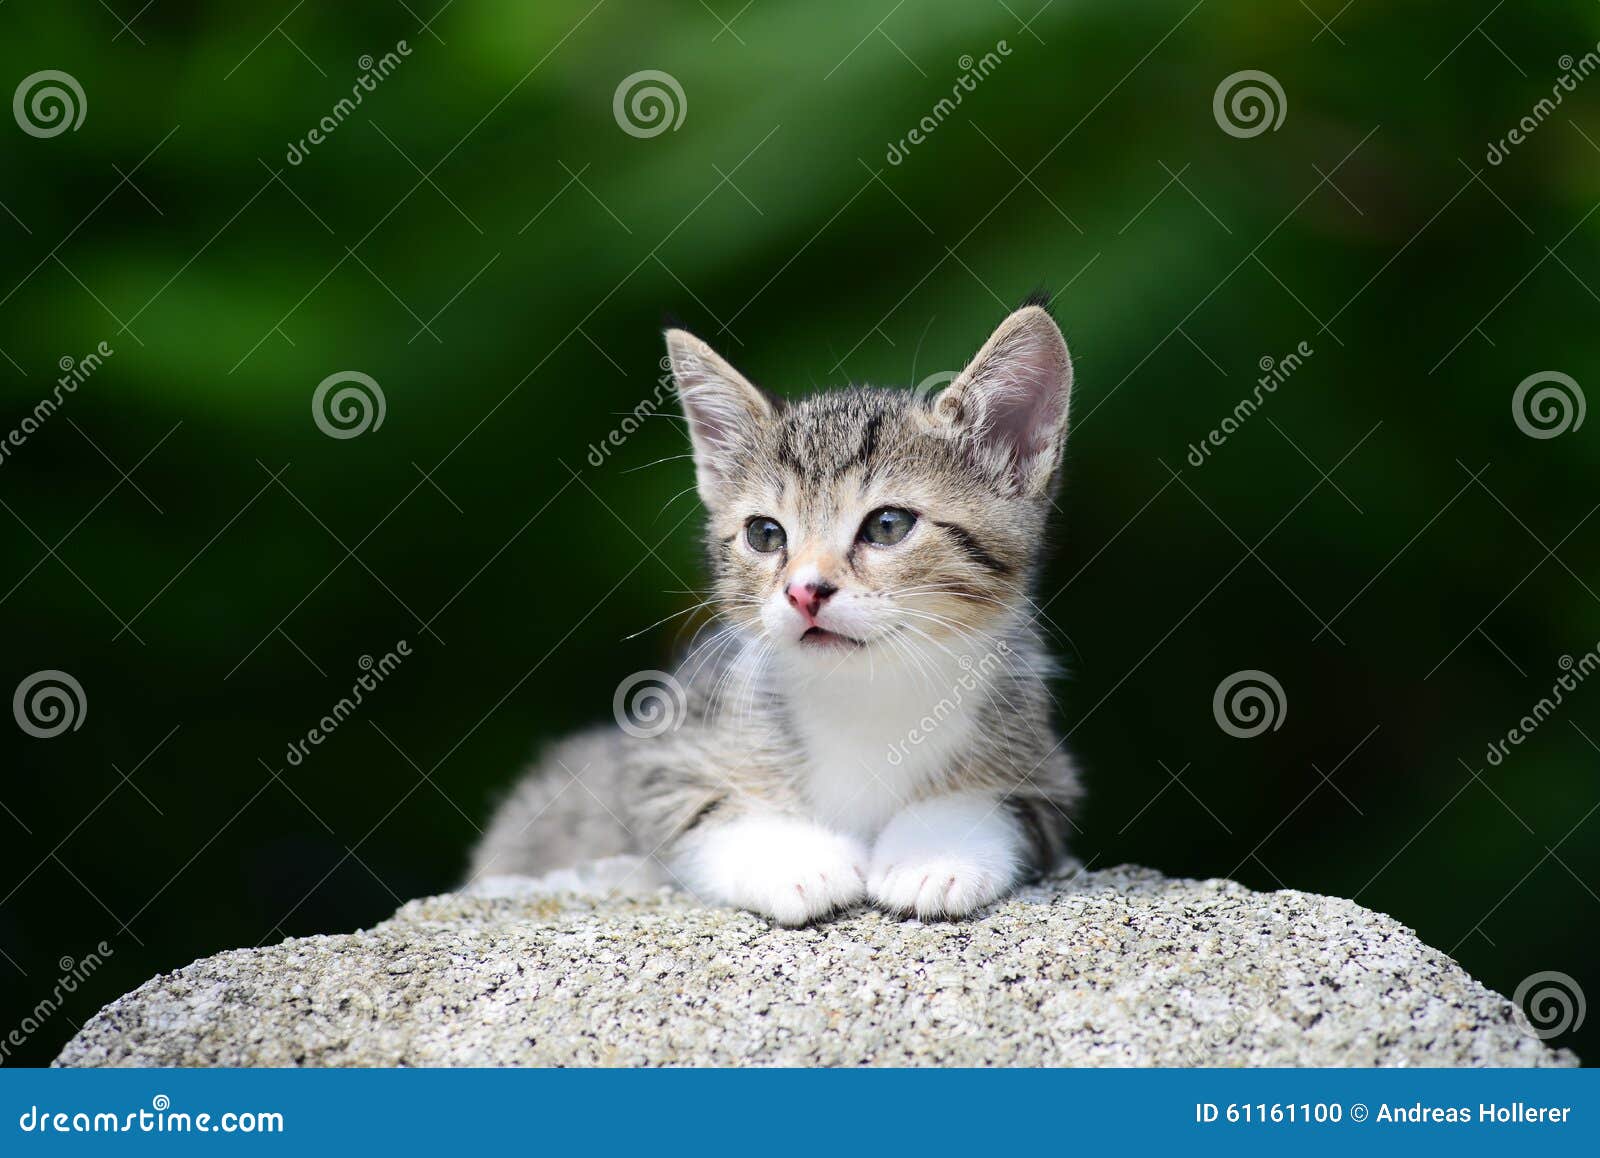 young adorable kitten